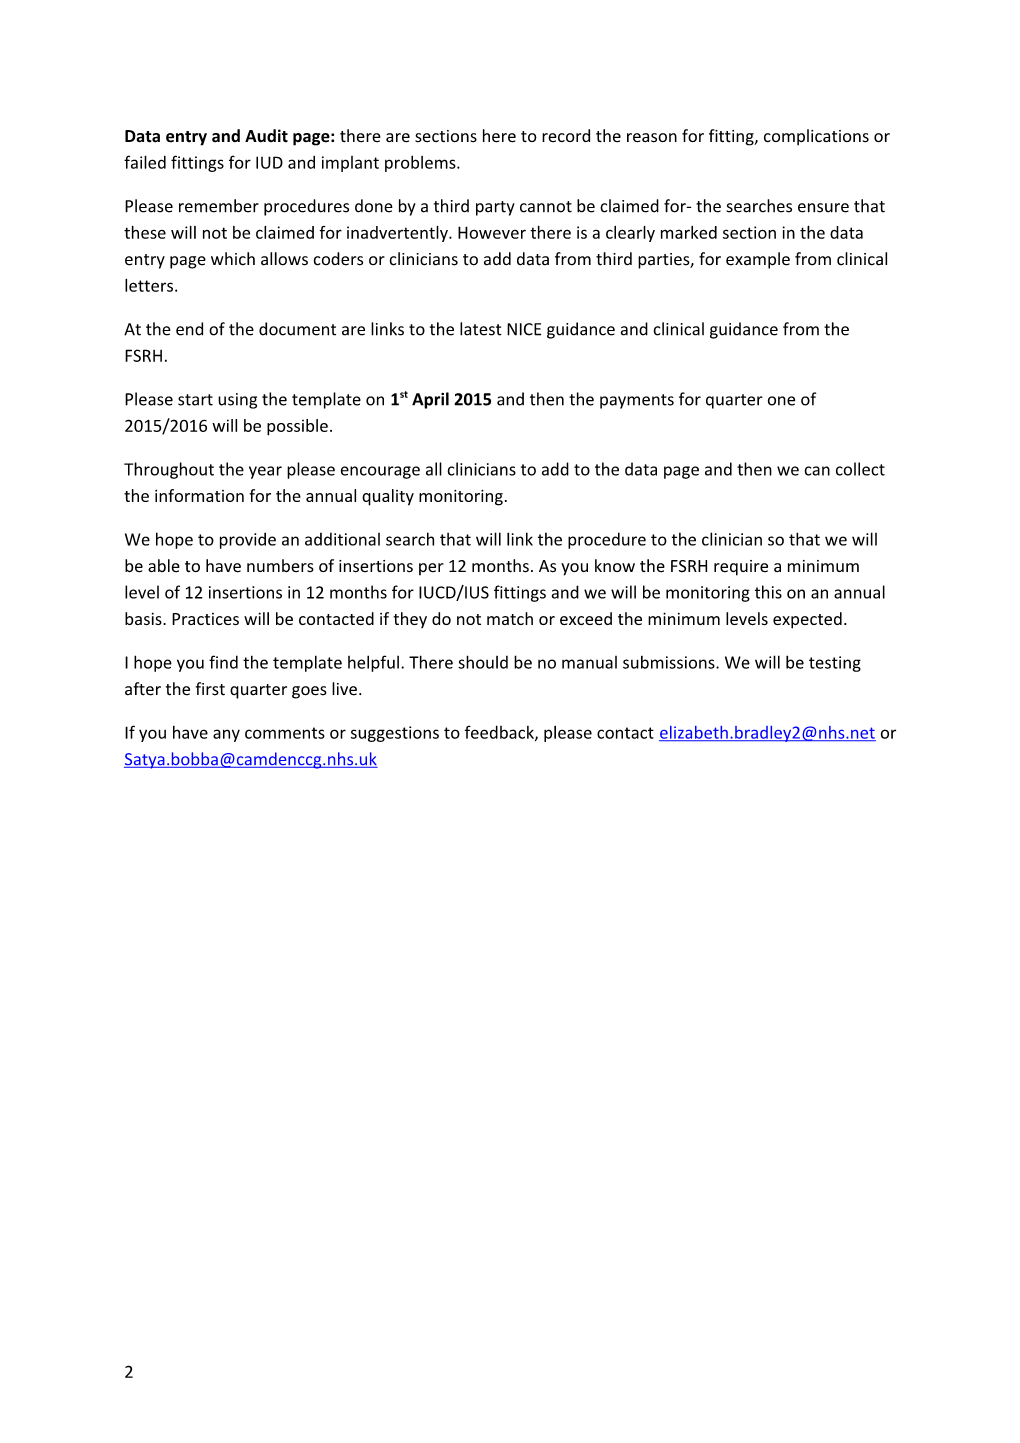 Letter to GP Practices Re Iucd/Ius & Contraceptive Implant LCS Template